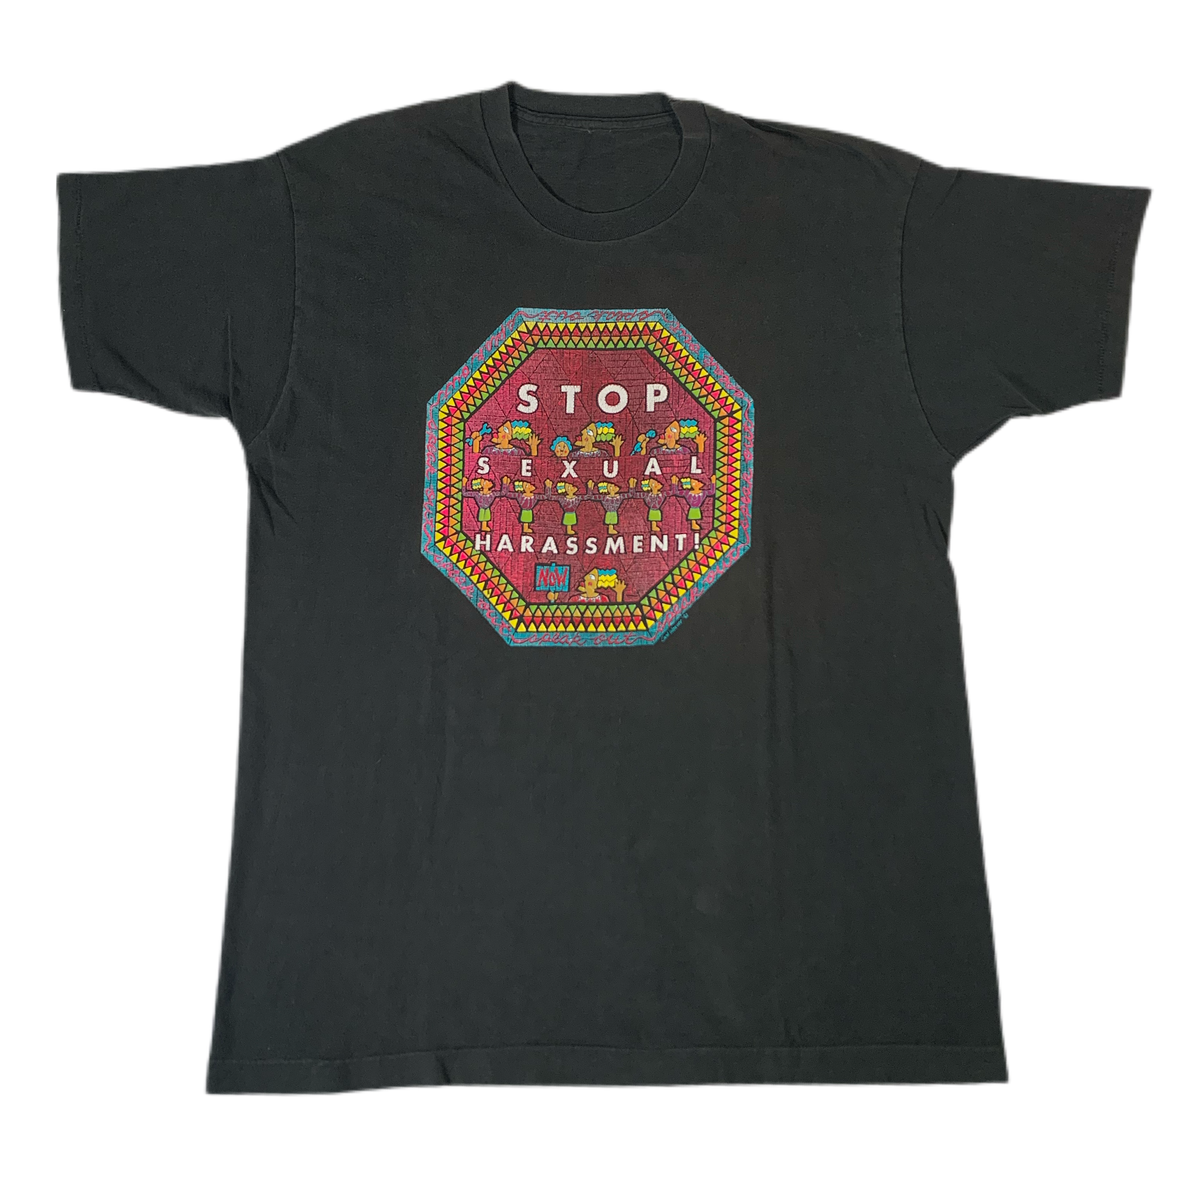 Vintage Stop Sexual Harassment “Speak Out” T-Shirt - jointcustodydc